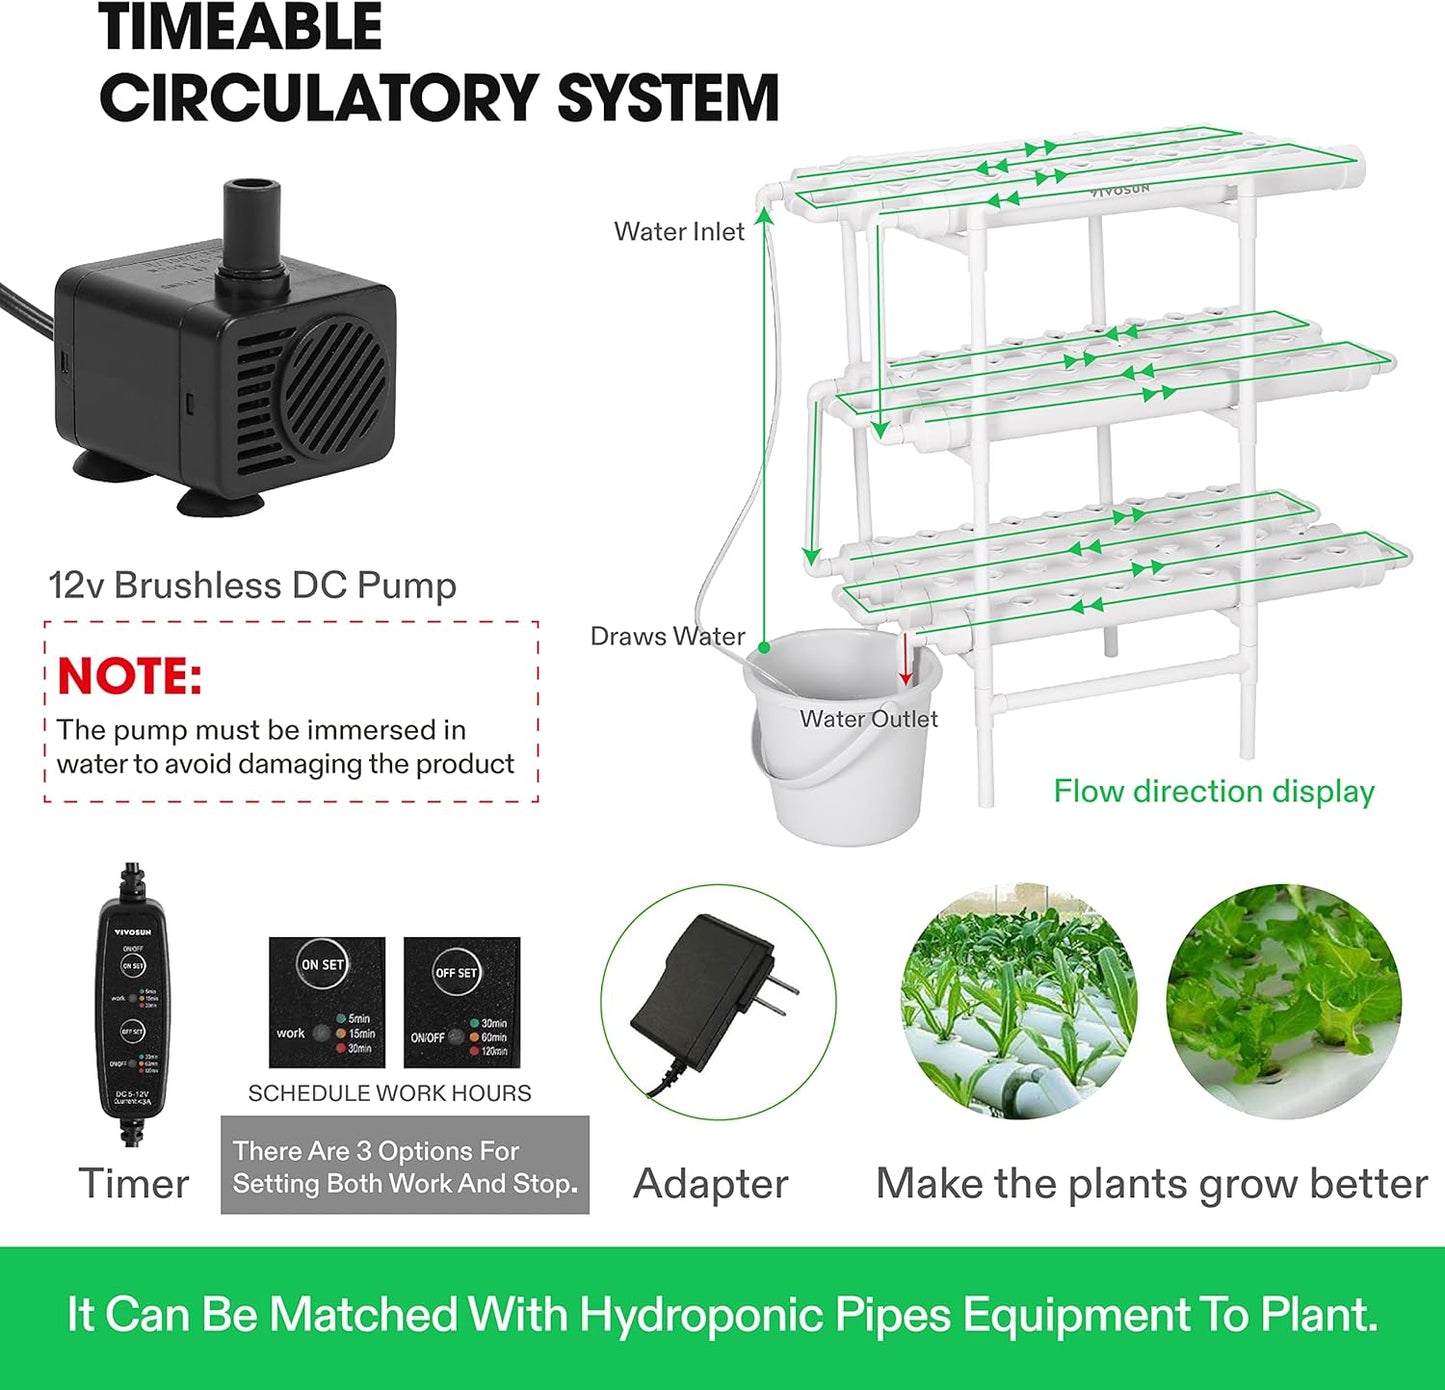 Hydroponics Growing System 108 Plant Sites, 3 Layers 12 Food-Grade PVC-U Pipes Gardening System Grow Kit with Water Pump Timer, Nest Basket and Sponge for Leafy Vegetables